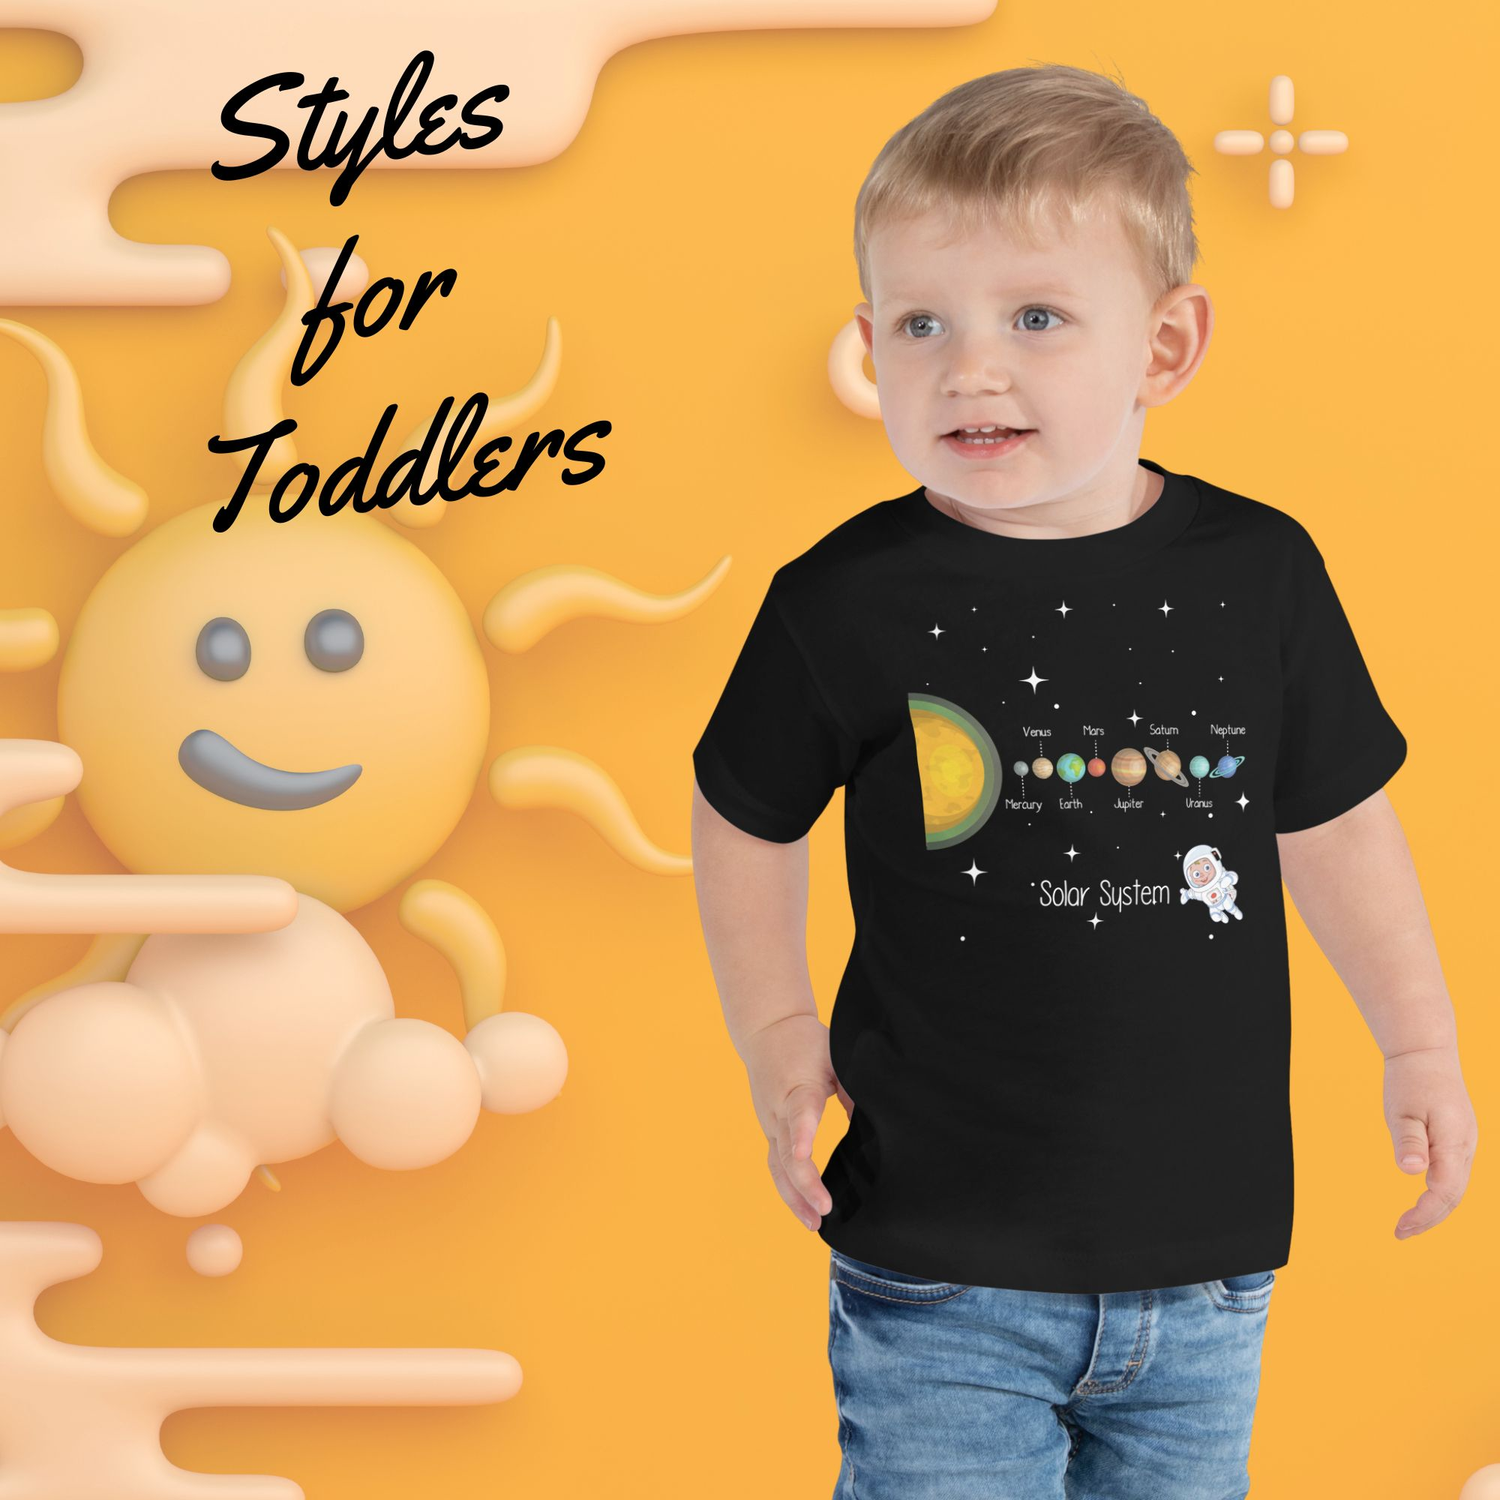 Styles for Toddlers